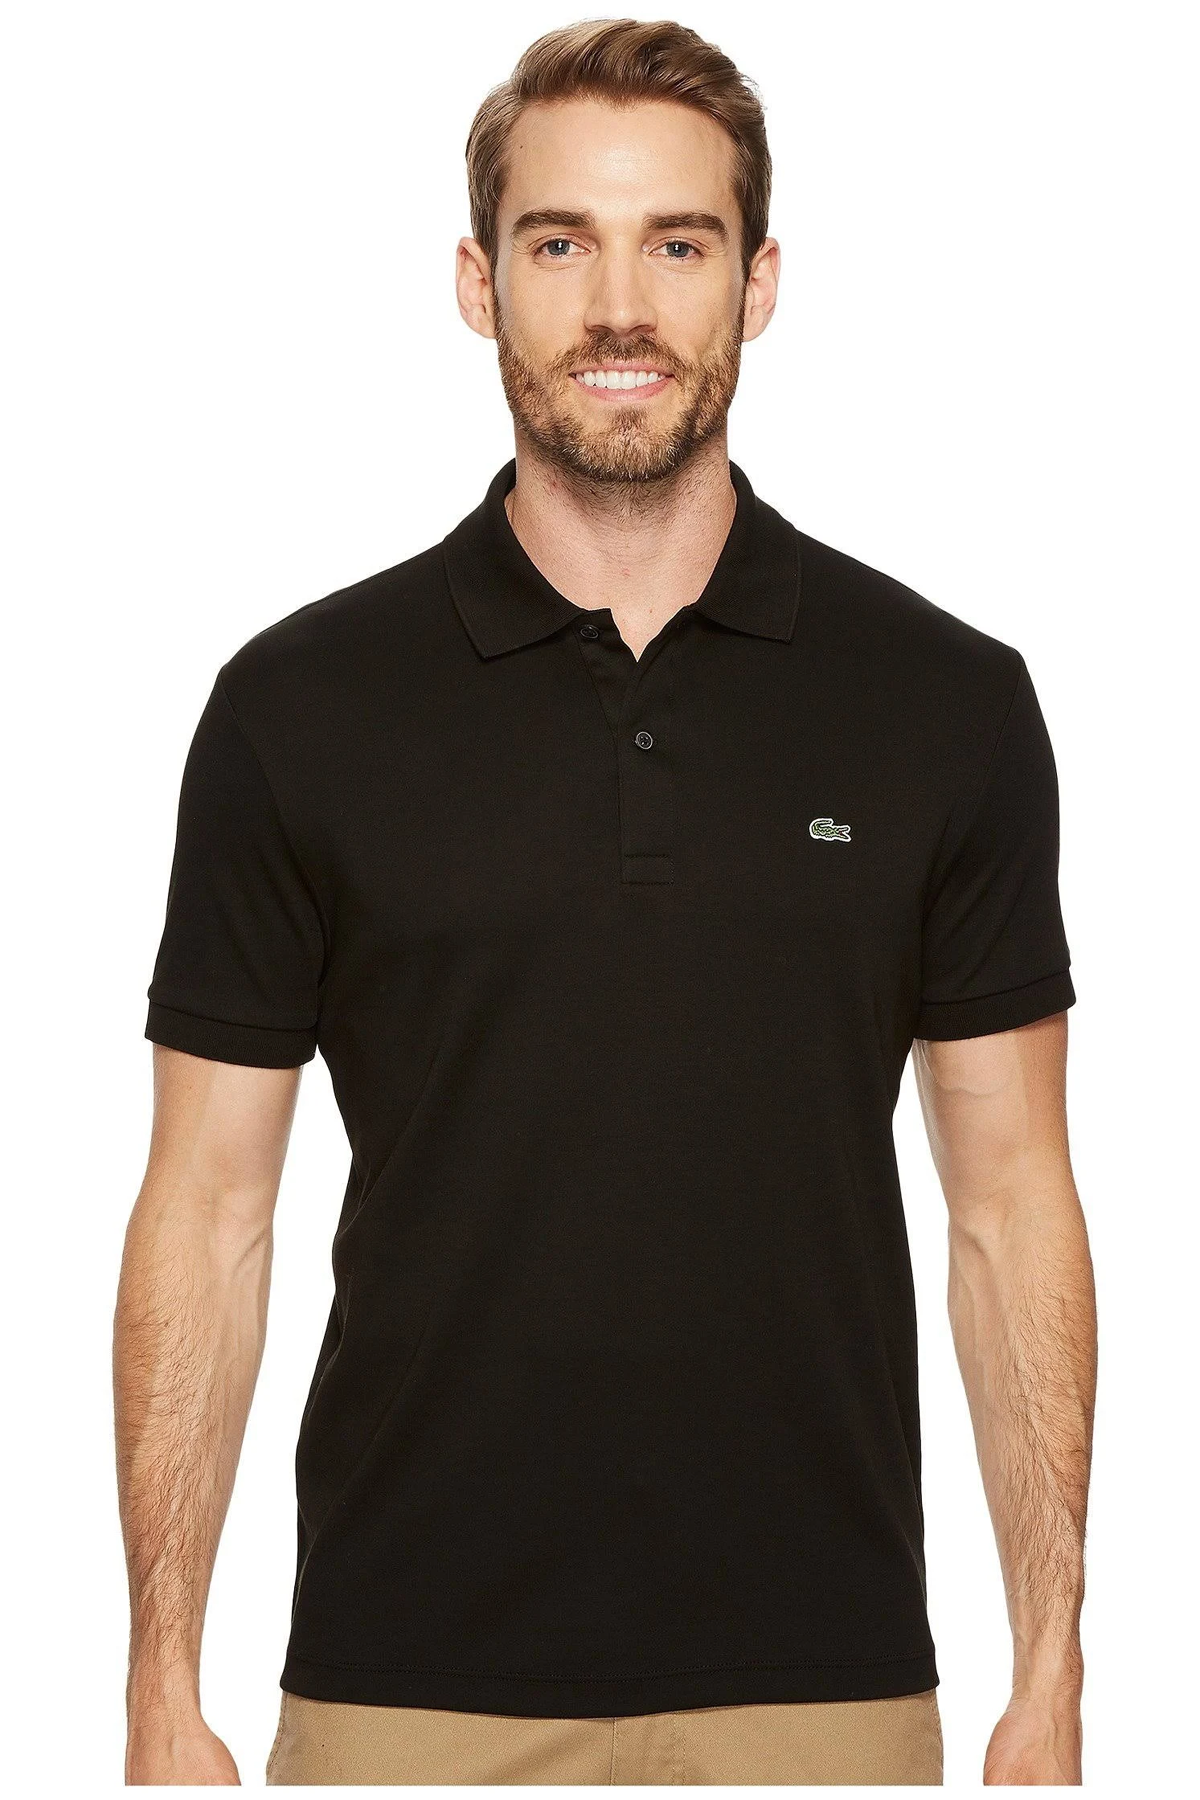 Lacoste Black dh2050 polo shirts with logo embroidery